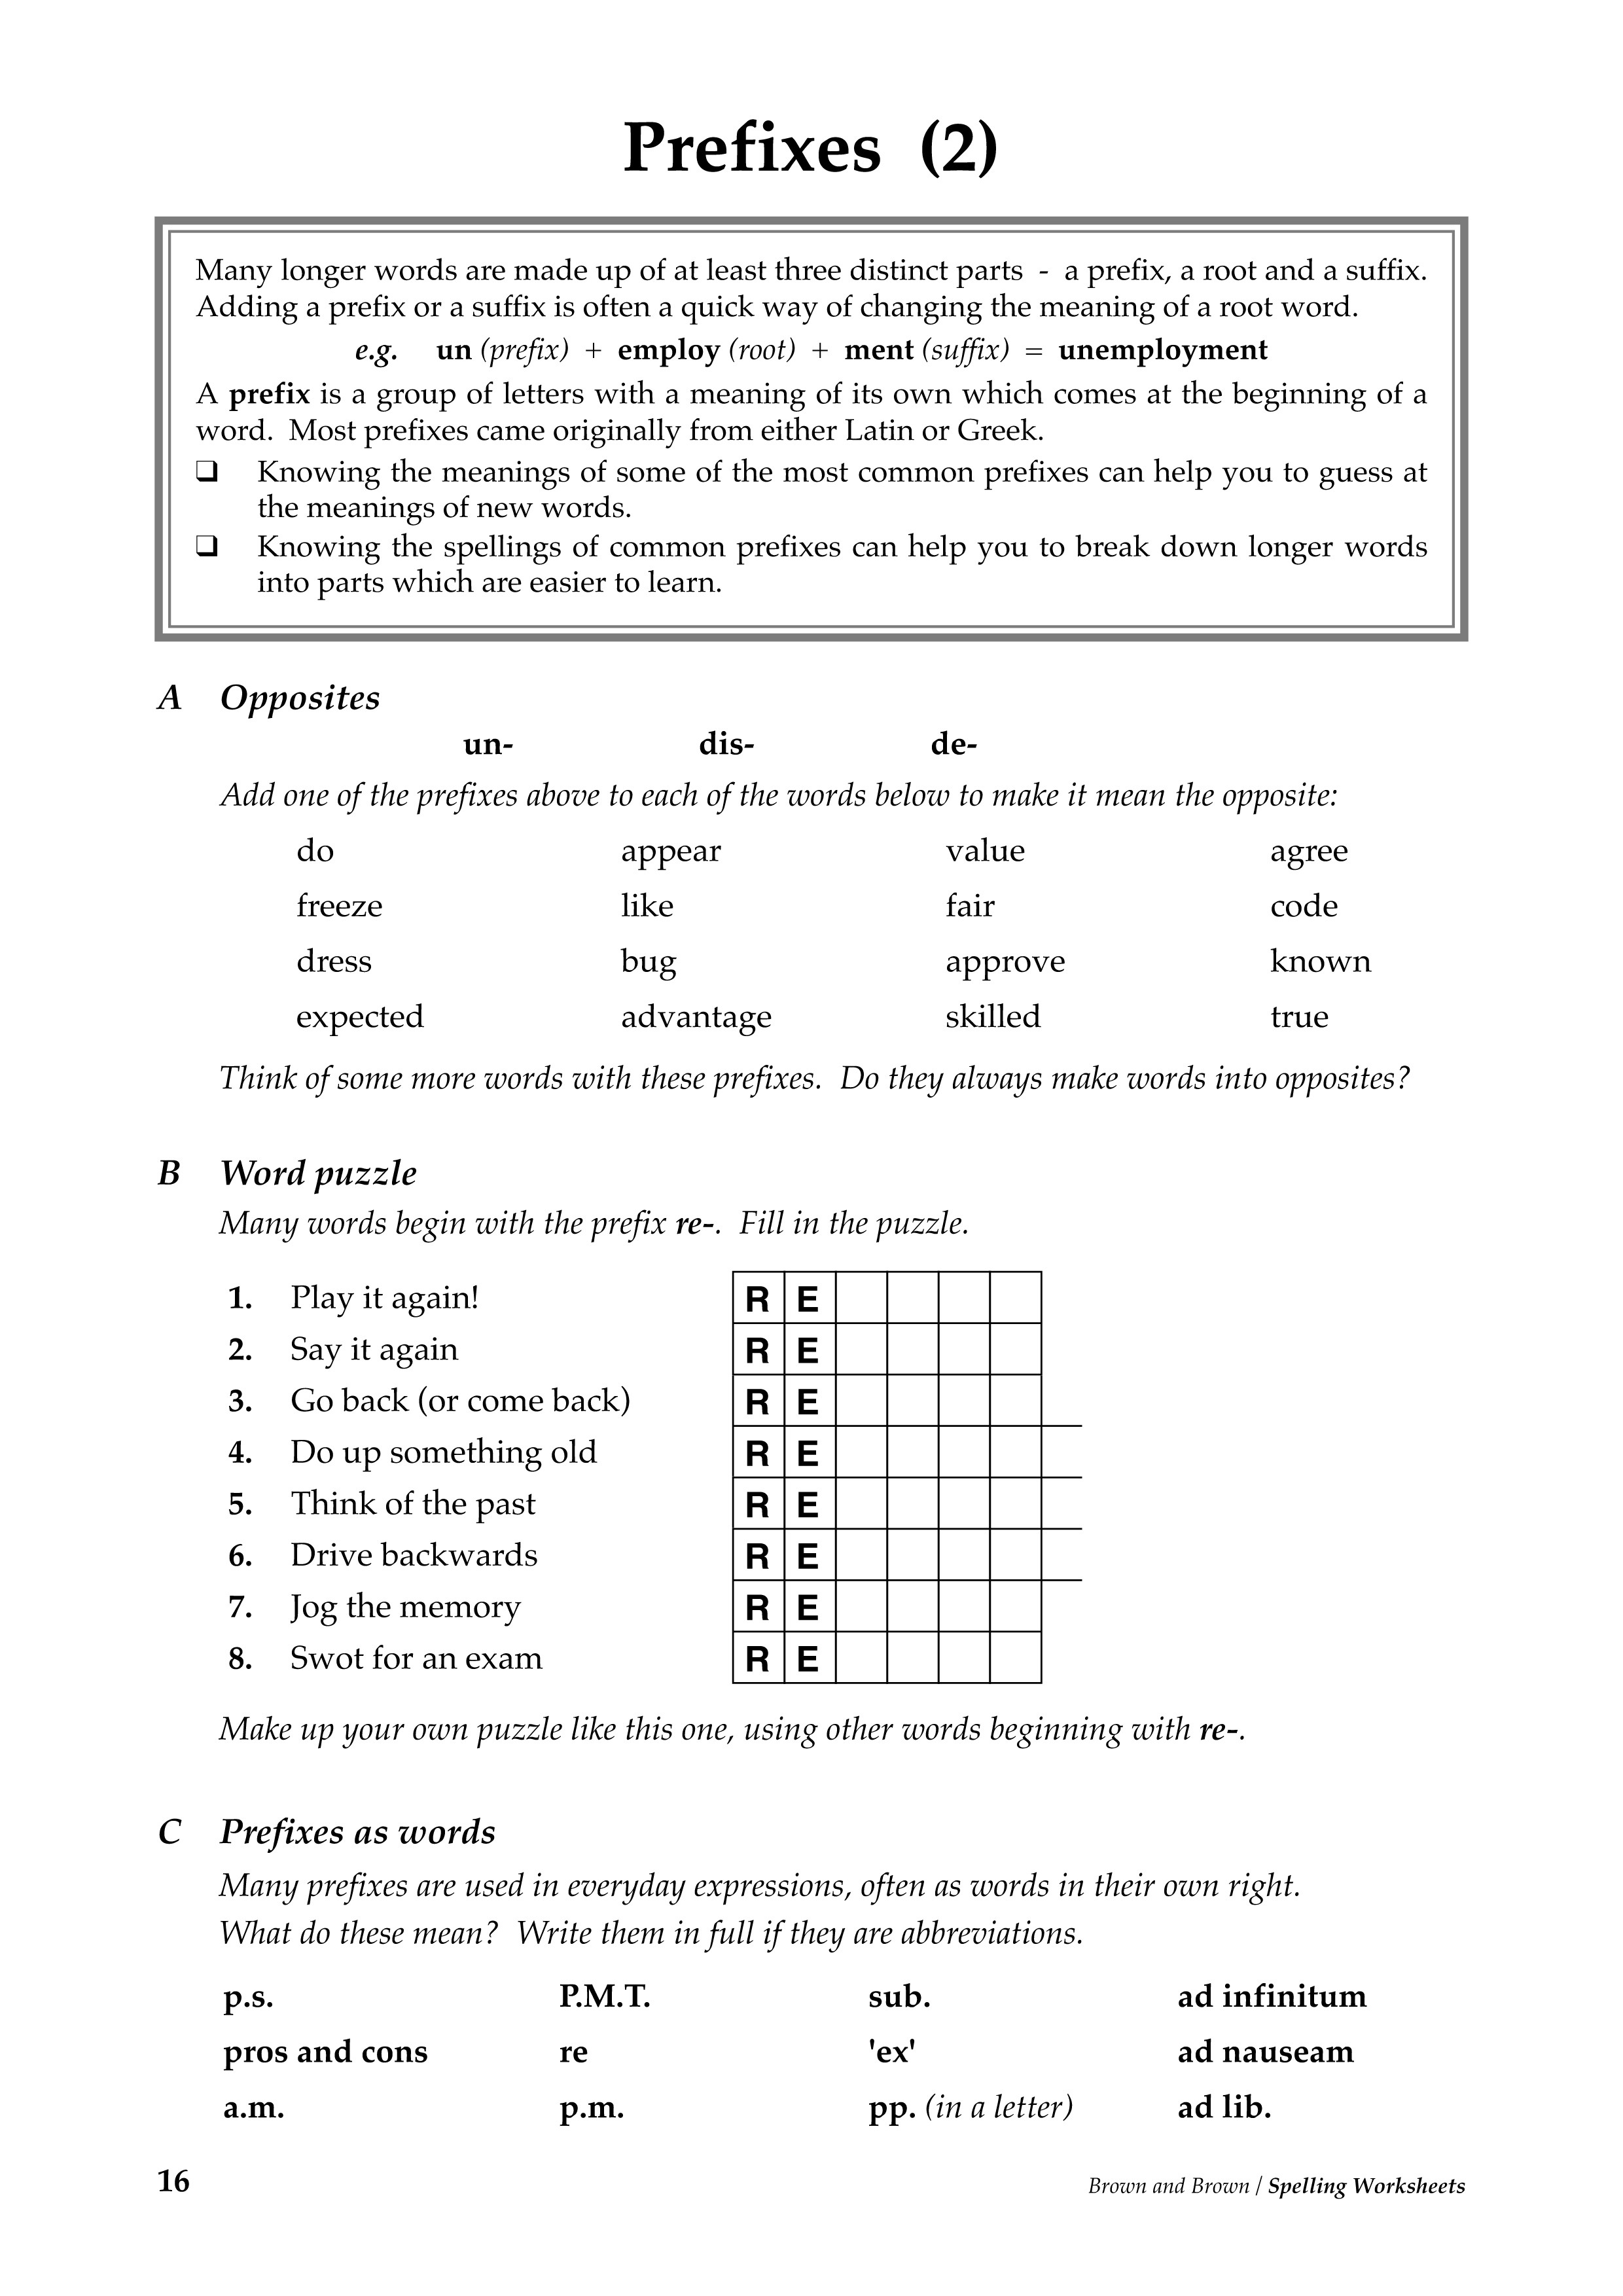 Spelling Worksheets | The Adult Literacy Specialist | Gatehouse Media - Free Printable Spelling Worksheets For Adults